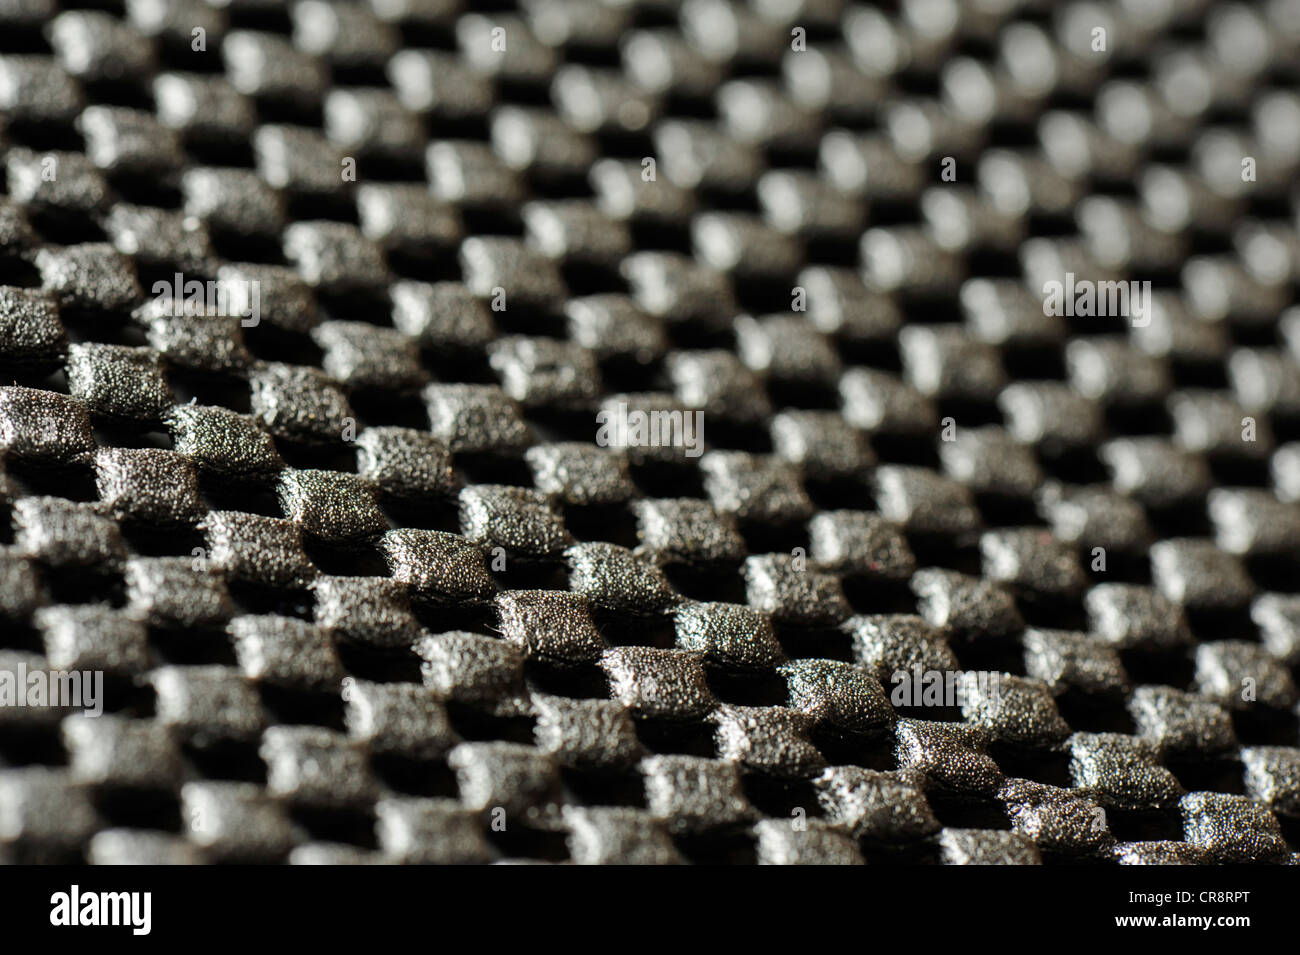 Close-up of black perforated material Stock Photo